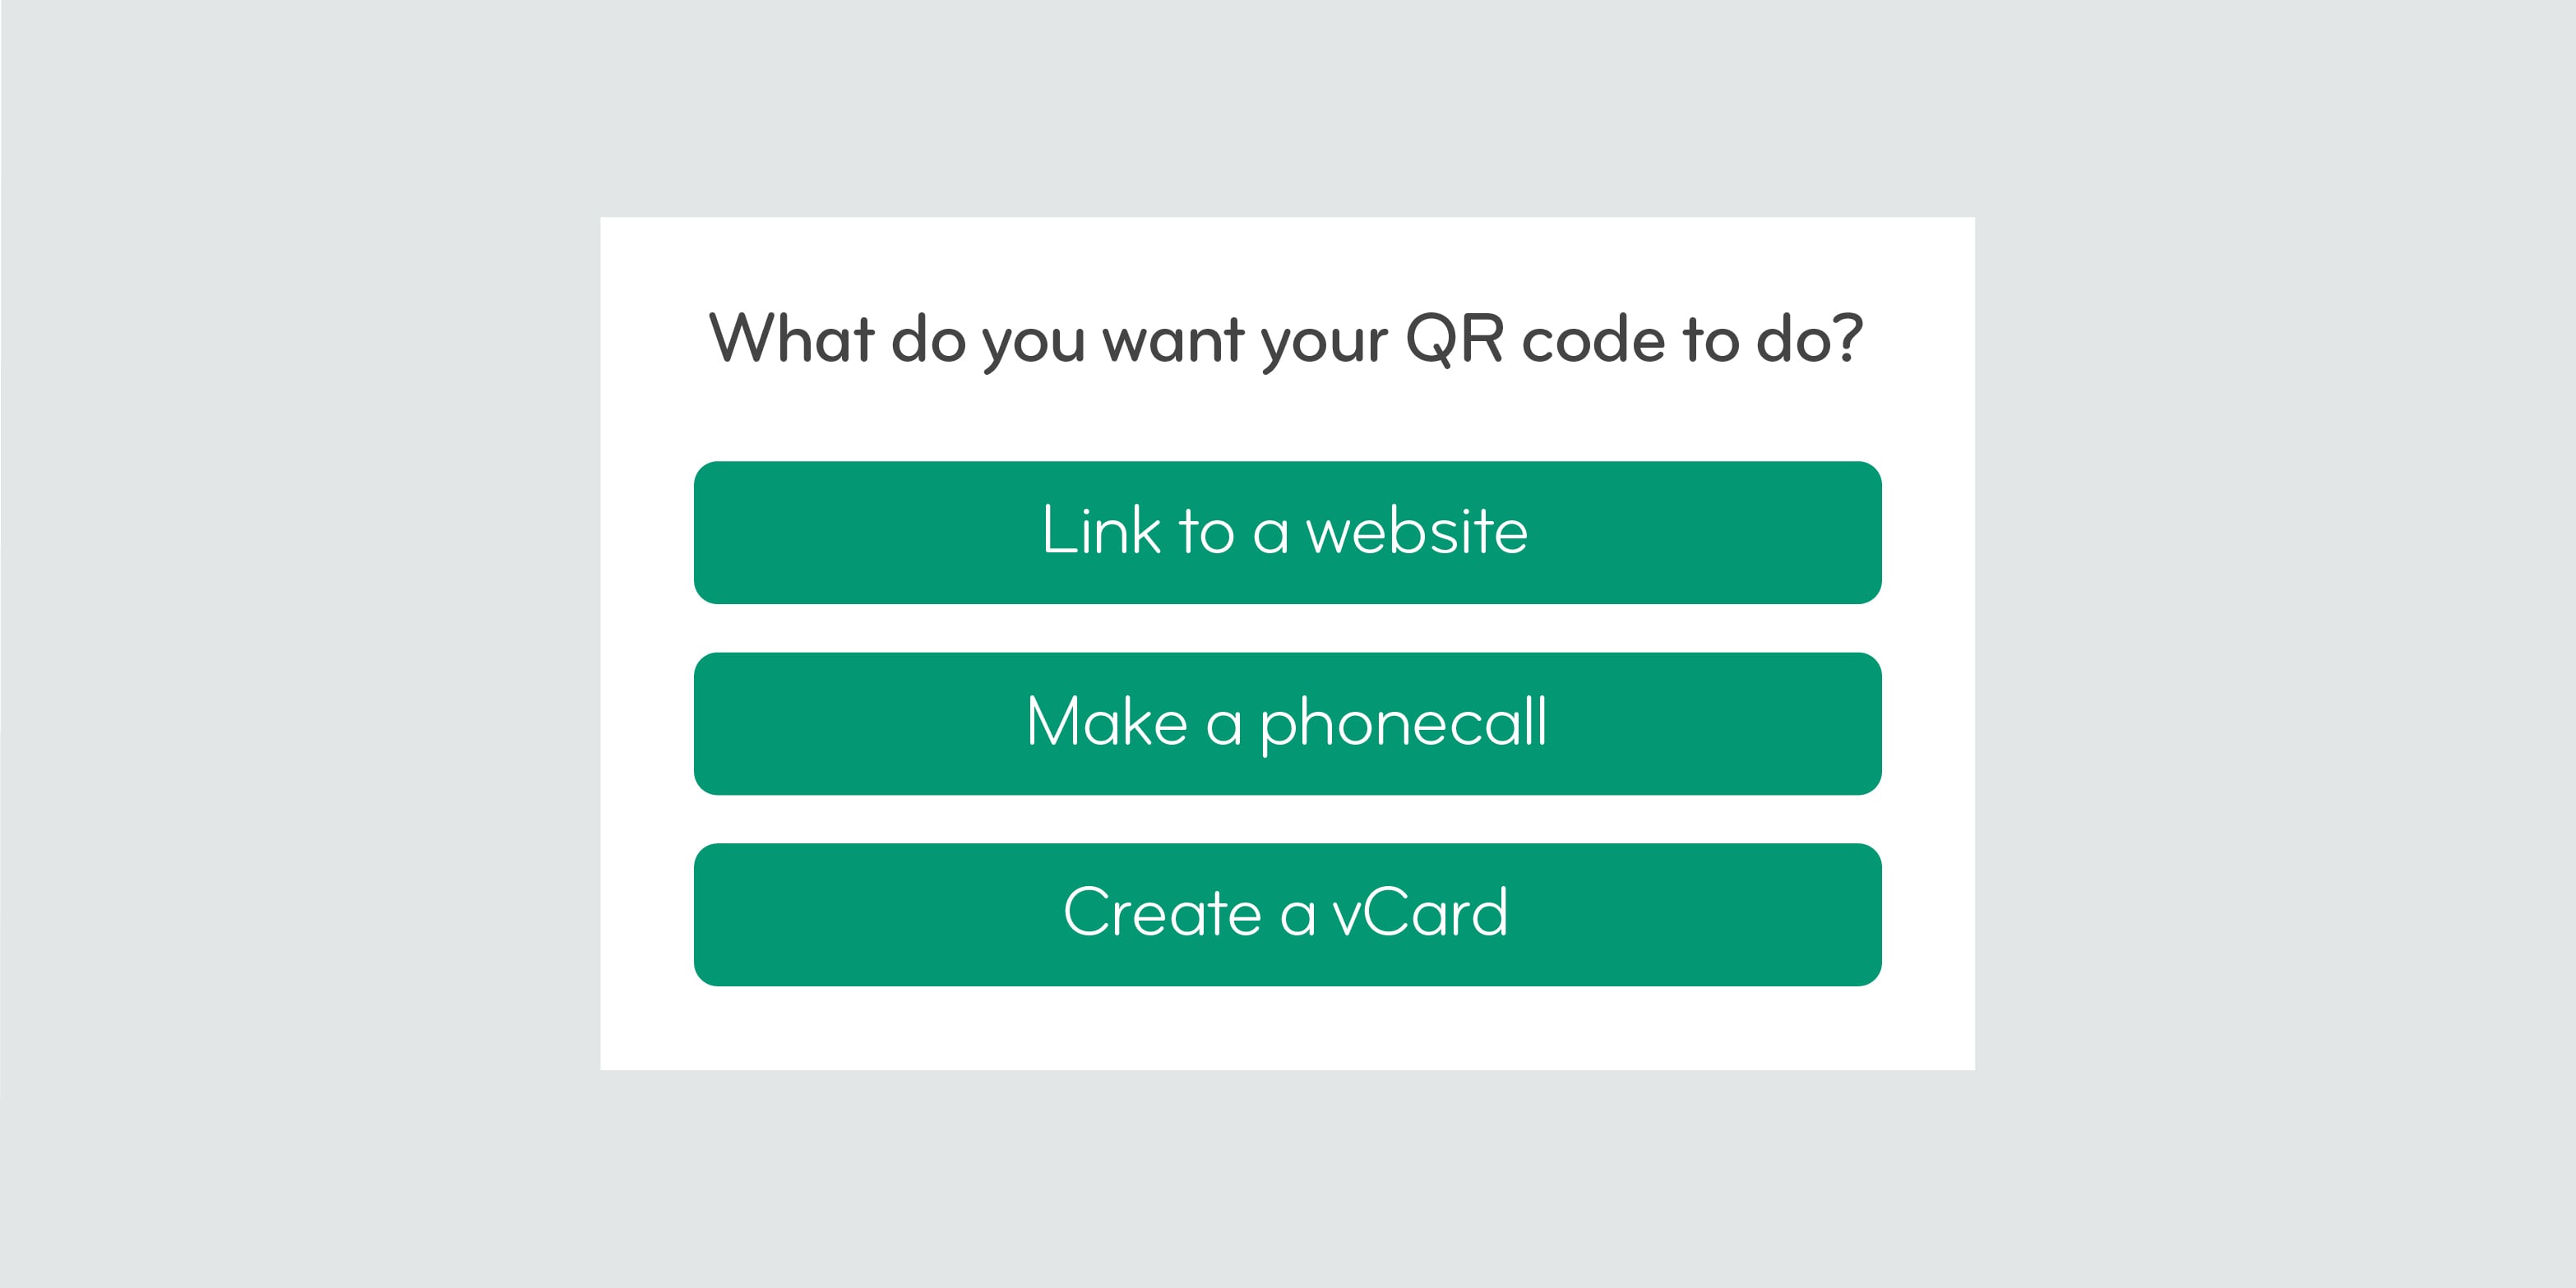 Step 3: Generate your QR code